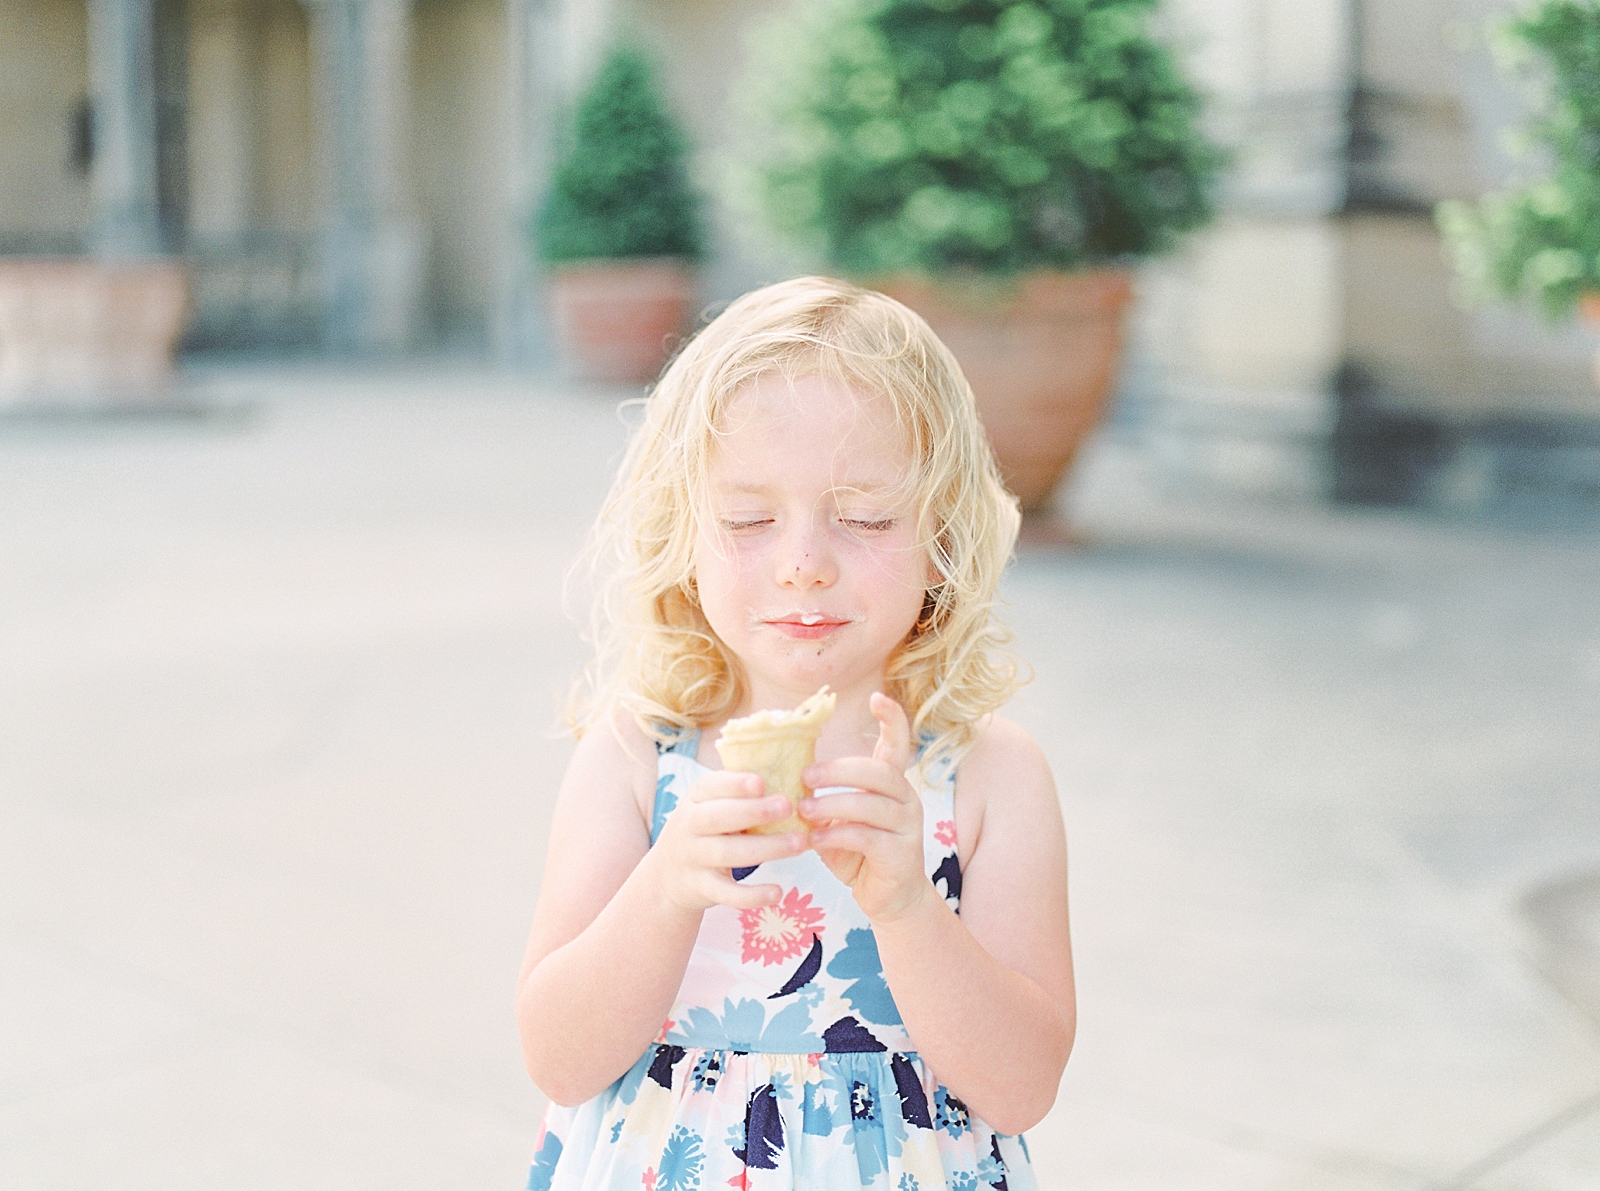 Biltmore House and Gardens little girl eating ice cream in front of house Photo